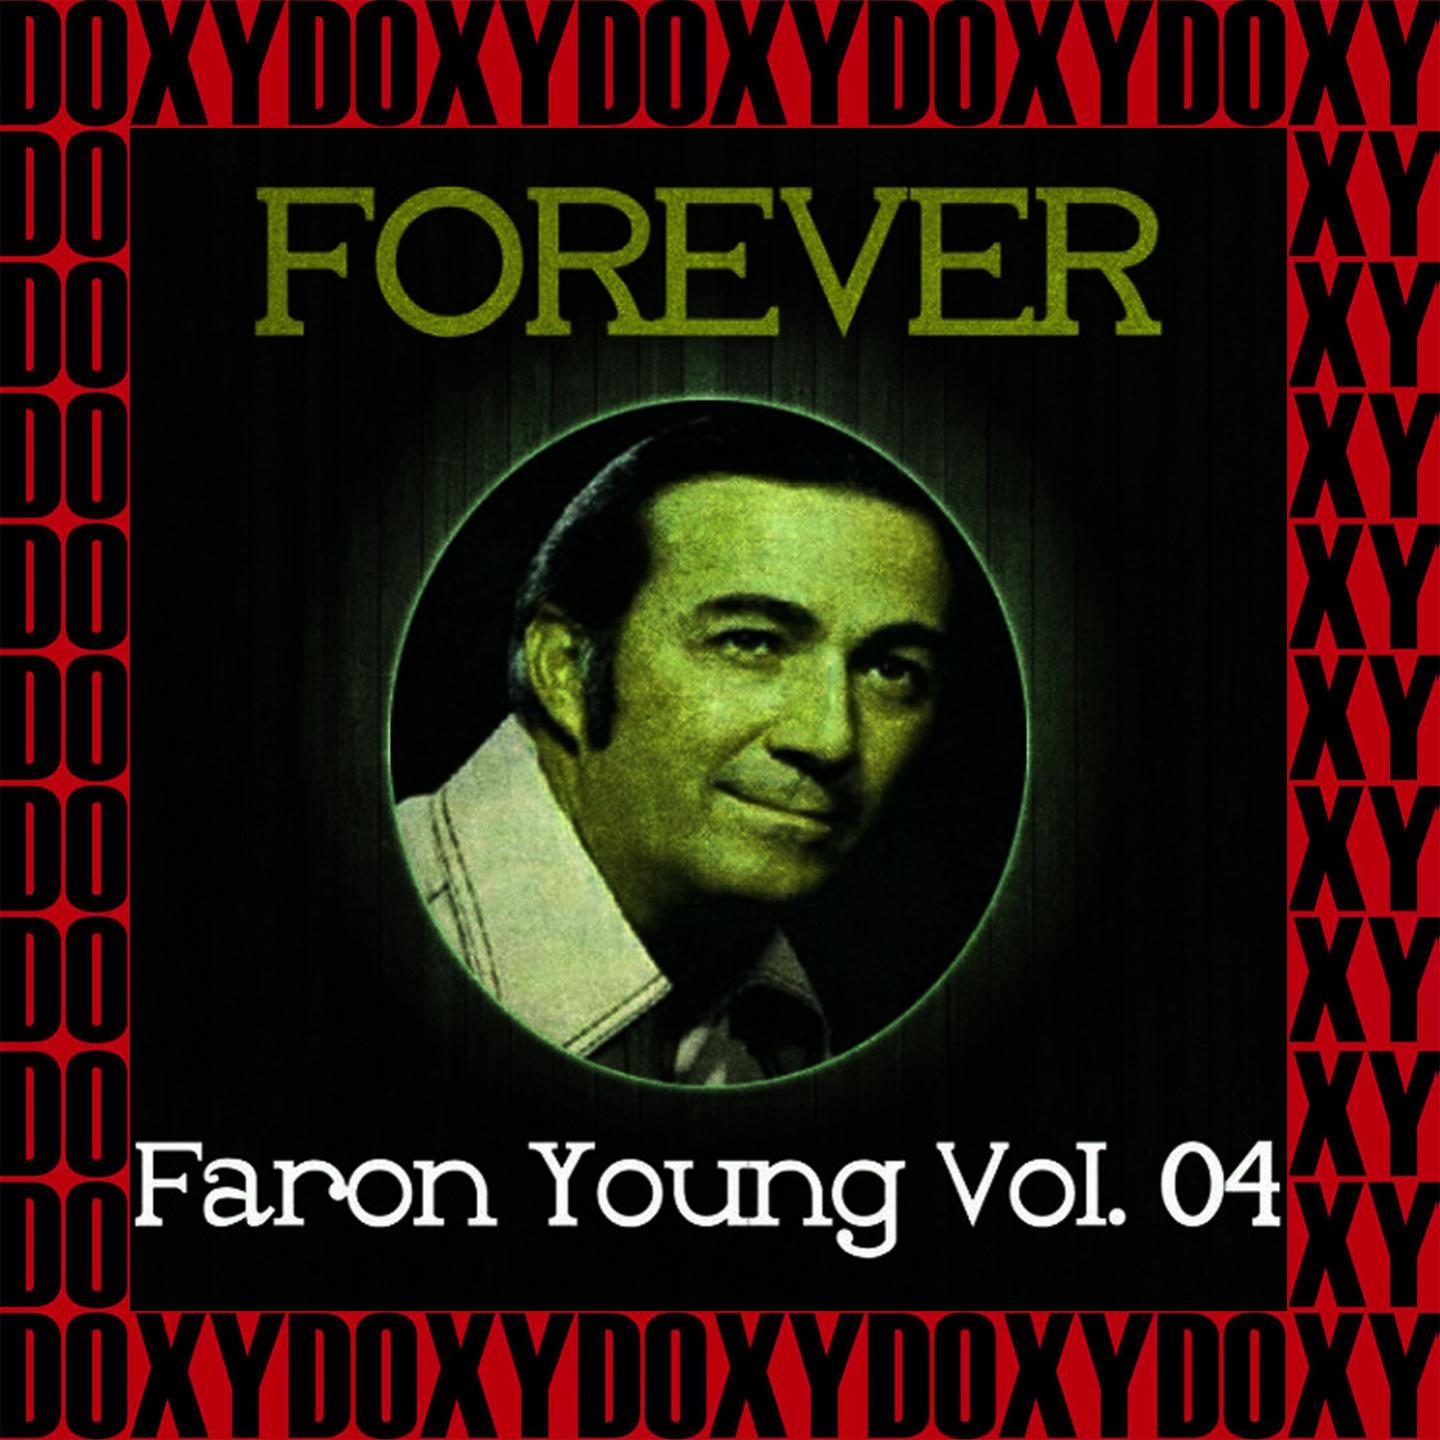 Forever Faron Young Vol. 4 (Remastered Version) (Doxy Collection)